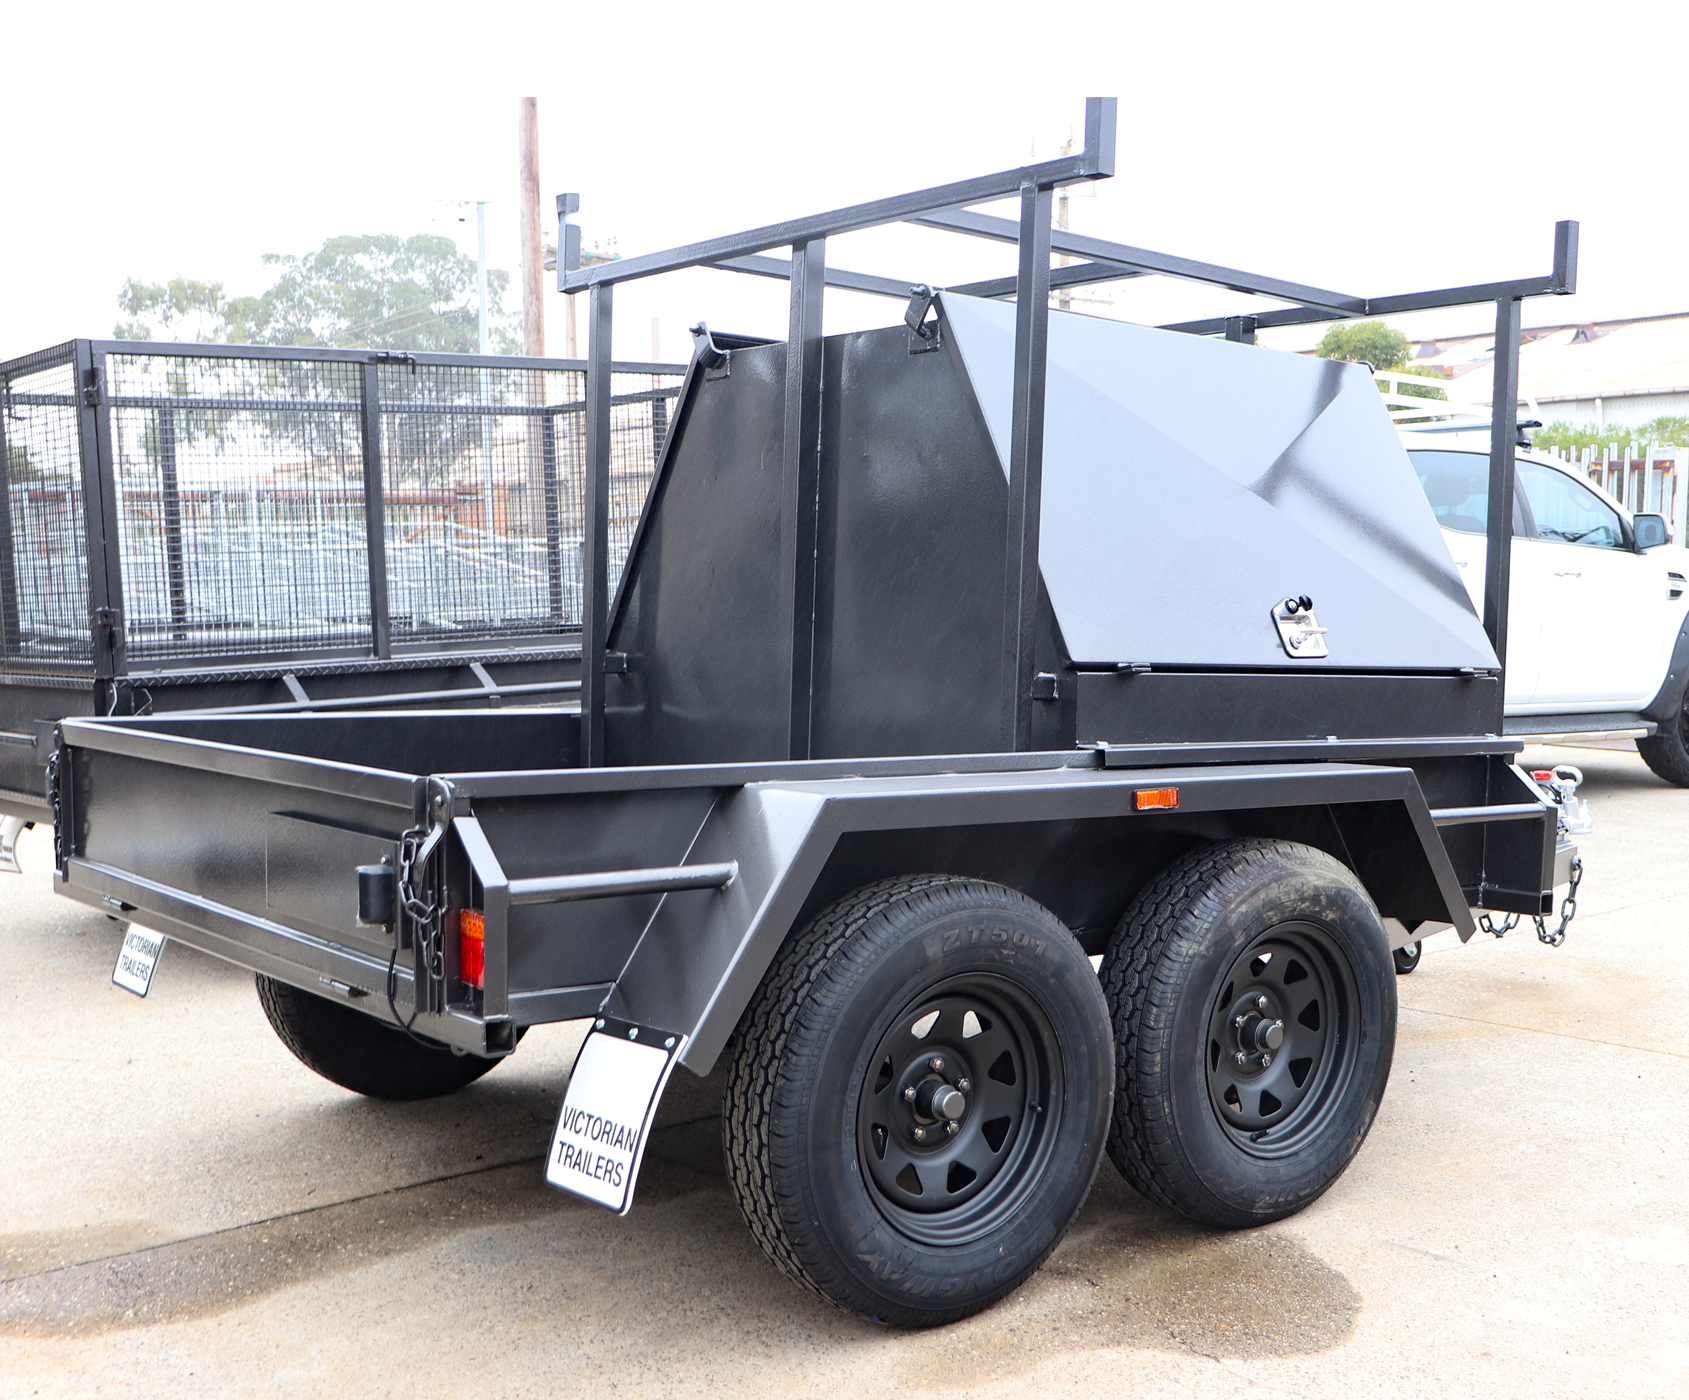 Tradie Top Trailer for Sale Victorian Trailers Melbourne